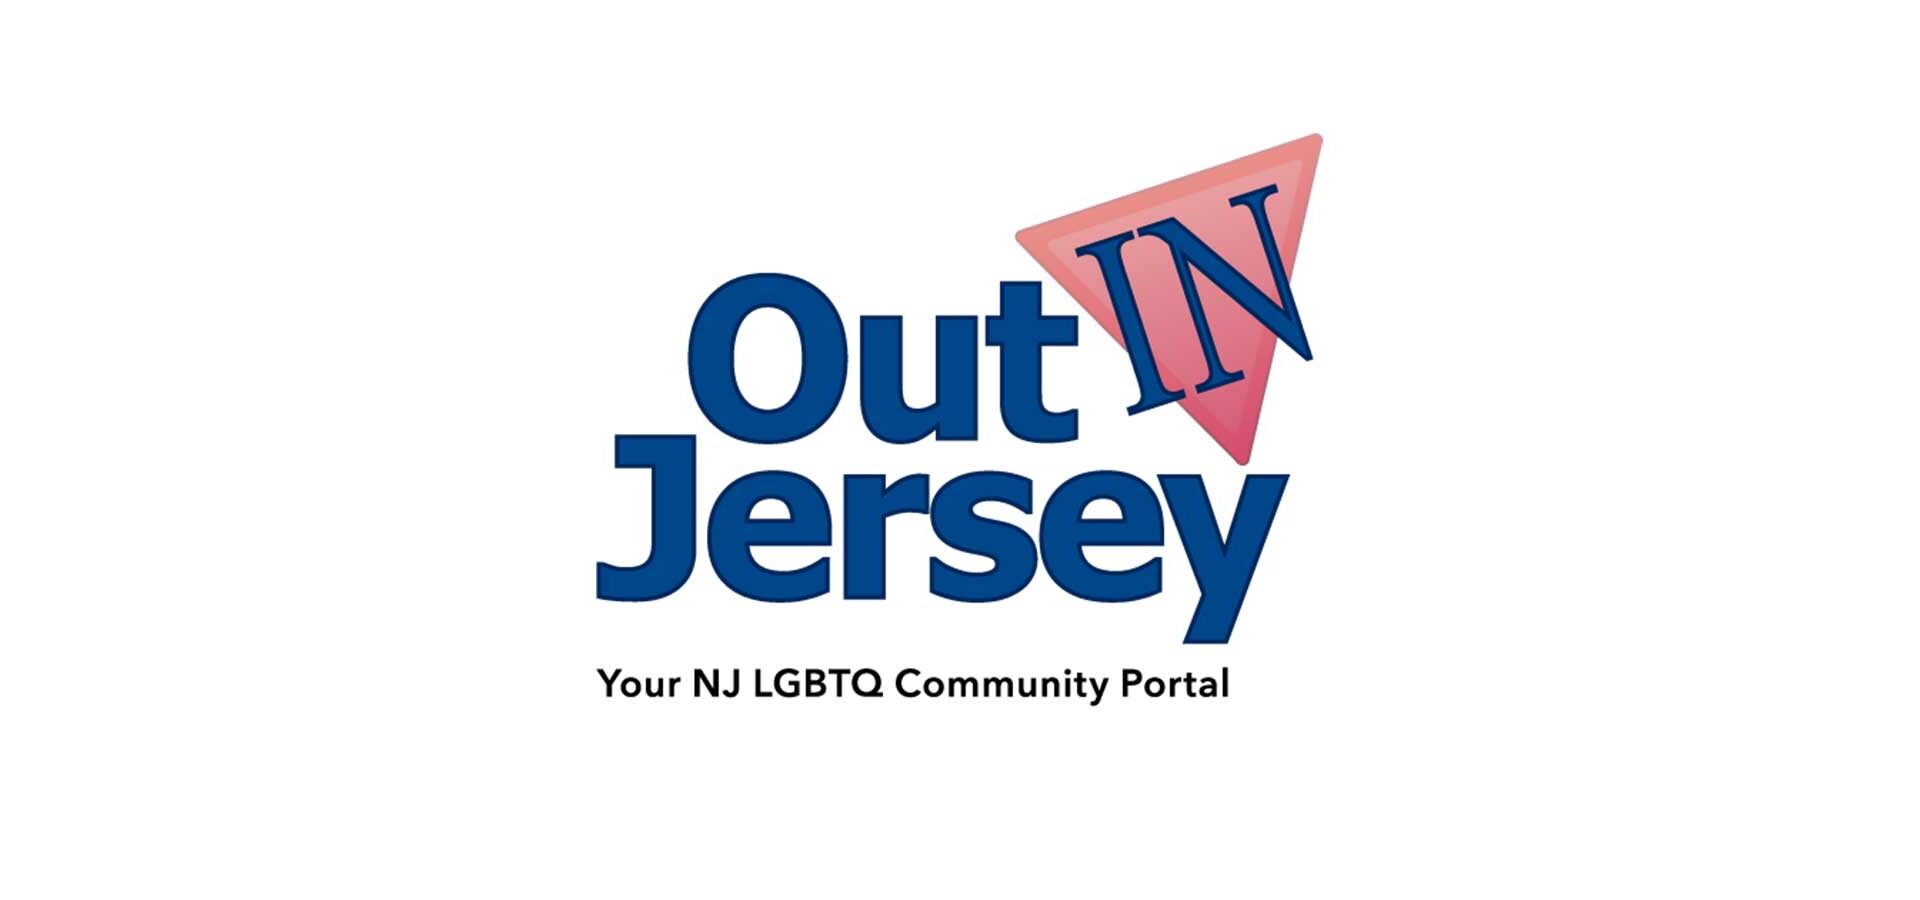 Out in Jersey. Your NJ LGBTQ Community Portal. Logo.